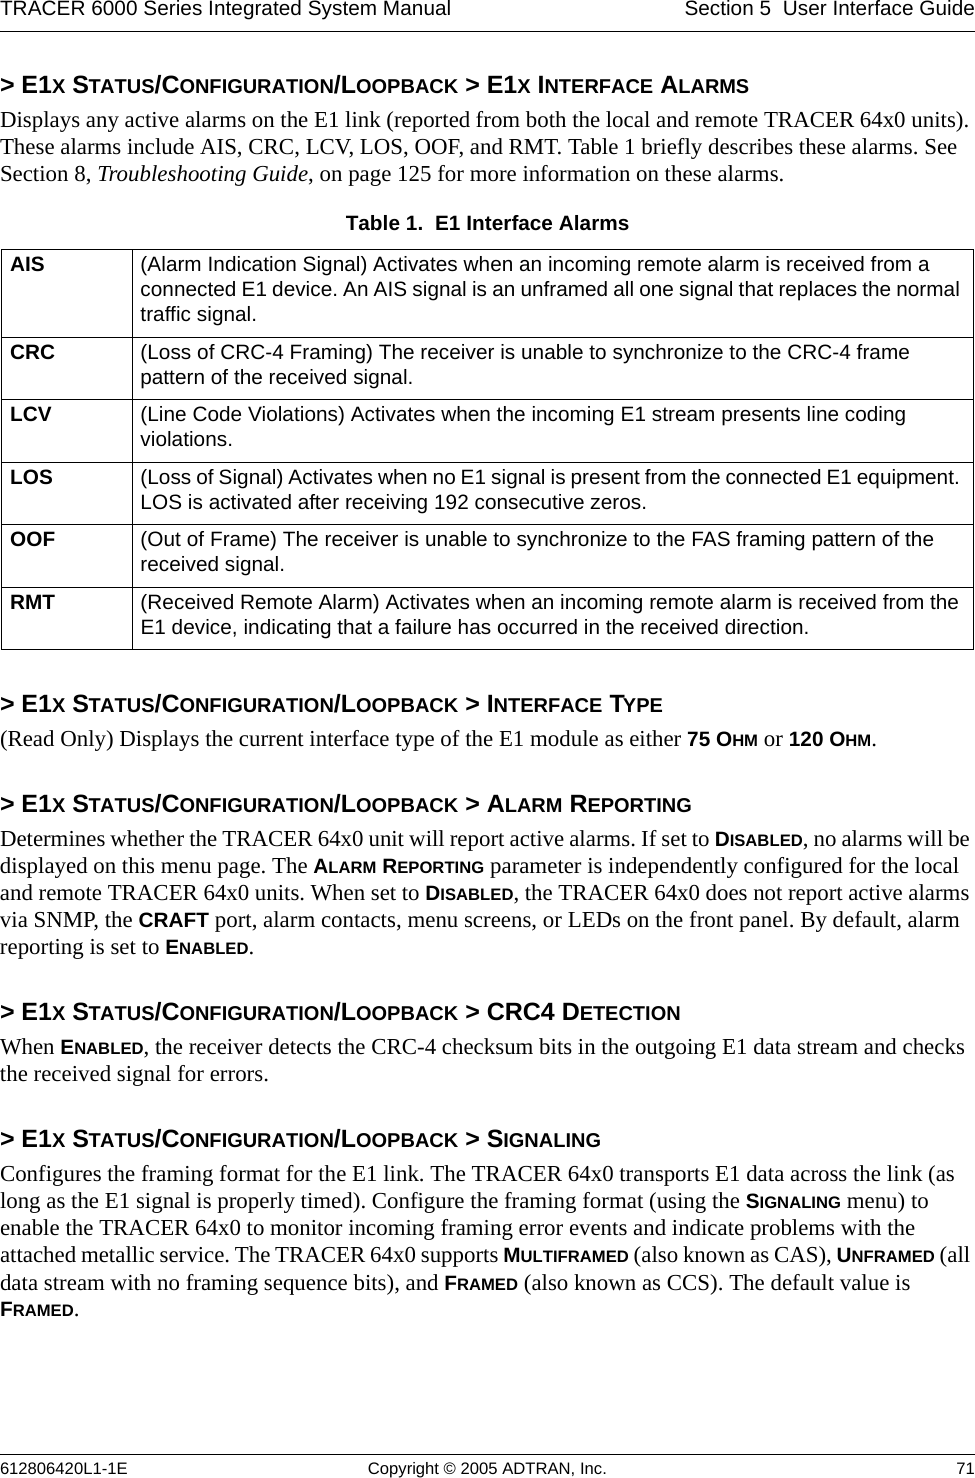 TRACER 6000 Series Integrated System Manual Section 5  User Interface Guide612806420L1-1E Copyright © 2005 ADTRAN, Inc. 71&gt; E1X STATUS/CONFIGURATION/LOOPBACK &gt; E1X INTERFACE ALARMSDisplays any active alarms on the E1 link (reported from both the local and remote TRACER 64x0 units). These alarms include AIS, CRC, LCV, LOS, OOF, and RMT. Table 1 briefly describes these alarms. See Section 8, Troubleshooting Guide, on page 125 for more information on these alarms.&gt; E1X STATUS/CONFIGURATION/LOOPBACK &gt; INTERFACE TYPE(Read Only) Displays the current interface type of the E1 module as either 75 OHM or 120 OHM.&gt; E1X STATUS/CONFIGURATION/LOOPBACK &gt; ALARM REPORTINGDetermines whether the TRACER 64x0 unit will report active alarms. If set to DISABLED, no alarms will be displayed on this menu page. The ALARM REPORTING parameter is independently configured for the local and remote TRACER 64x0 units. When set to DISABLED, the TRACER 64x0 does not report active alarms via SNMP, the CRAFT port, alarm contacts, menu screens, or LEDs on the front panel. By default, alarm reporting is set to ENABLED.&gt; E1X STATUS/CONFIGURATION/LOOPBACK &gt; CRC4 DETECTIONWhen ENABLED, the receiver detects the CRC-4 checksum bits in the outgoing E1 data stream and checks the received signal for errors.&gt; E1X STATUS/CONFIGURATION/LOOPBACK &gt; SIGNALINGConfigures the framing format for the E1 link. The TRACER 64x0 transports E1 data across the link (as long as the E1 signal is properly timed). Configure the framing format (using the SIGNALING menu) to enable the TRACER 64x0 to monitor incoming framing error events and indicate problems with the attached metallic service. The TRACER 64x0 supports MULTIFRAMED (also known as CAS), UNFRAMED (all data stream with no framing sequence bits), and FRAMED (also known as CCS). The default value is FRAMED.Table 1.  E1 Interface Alarms AIS (Alarm Indication Signal) Activates when an incoming remote alarm is received from a connected E1 device. An AIS signal is an unframed all one signal that replaces the normal traffic signal.CRC (Loss of CRC-4 Framing) The receiver is unable to synchronize to the CRC-4 frame pattern of the received signal.LCV (Line Code Violations) Activates when the incoming E1 stream presents line coding violations.LOS (Loss of Signal) Activates when no E1 signal is present from the connected E1 equipment. LOS is activated after receiving 192 consecutive zeros.OOF (Out of Frame) The receiver is unable to synchronize to the FAS framing pattern of the received signal.RMT (Received Remote Alarm) Activates when an incoming remote alarm is received from the E1 device, indicating that a failure has occurred in the received direction.